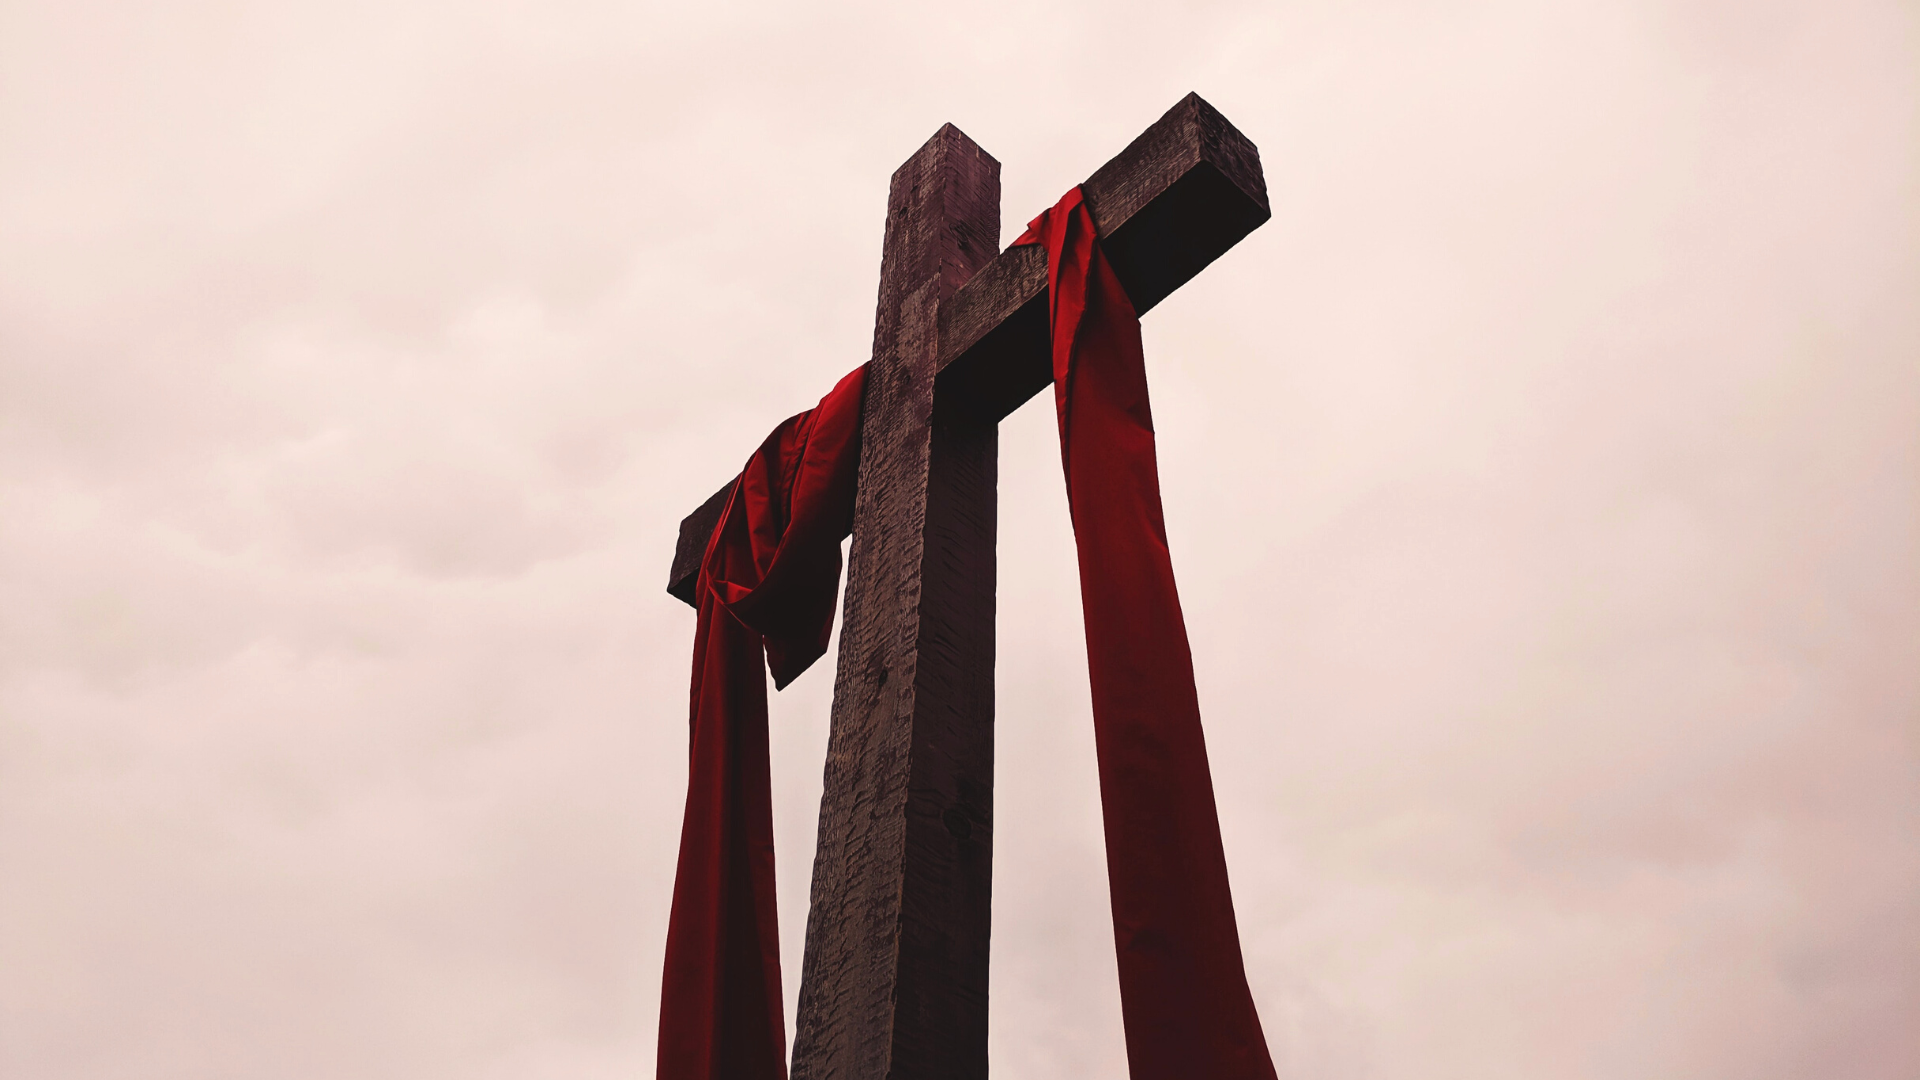 camera pointing up at a tall wooden cross with a dark red fabric draped over it